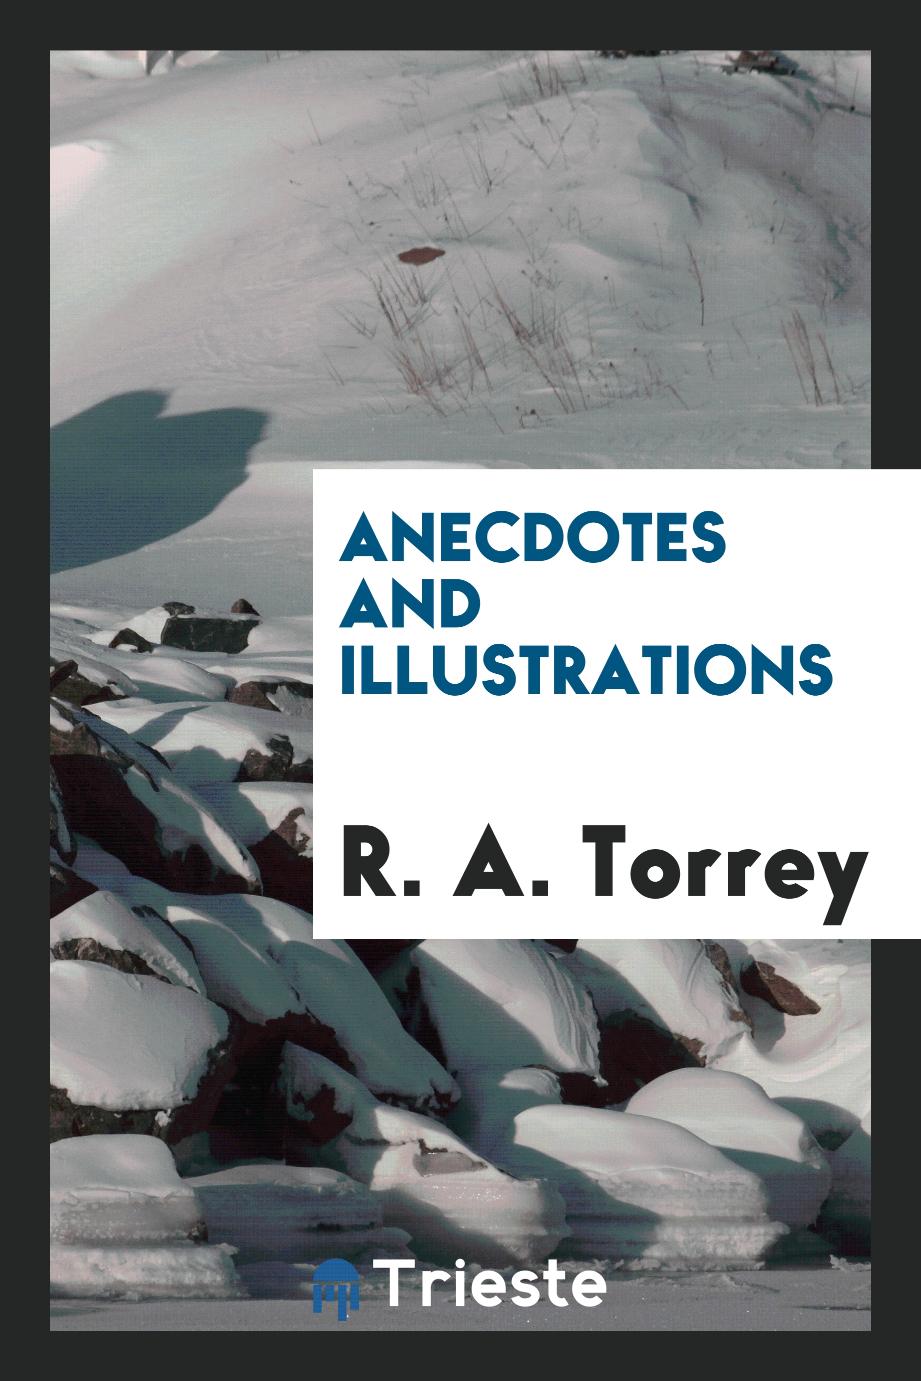 Anecdotes and illustrations